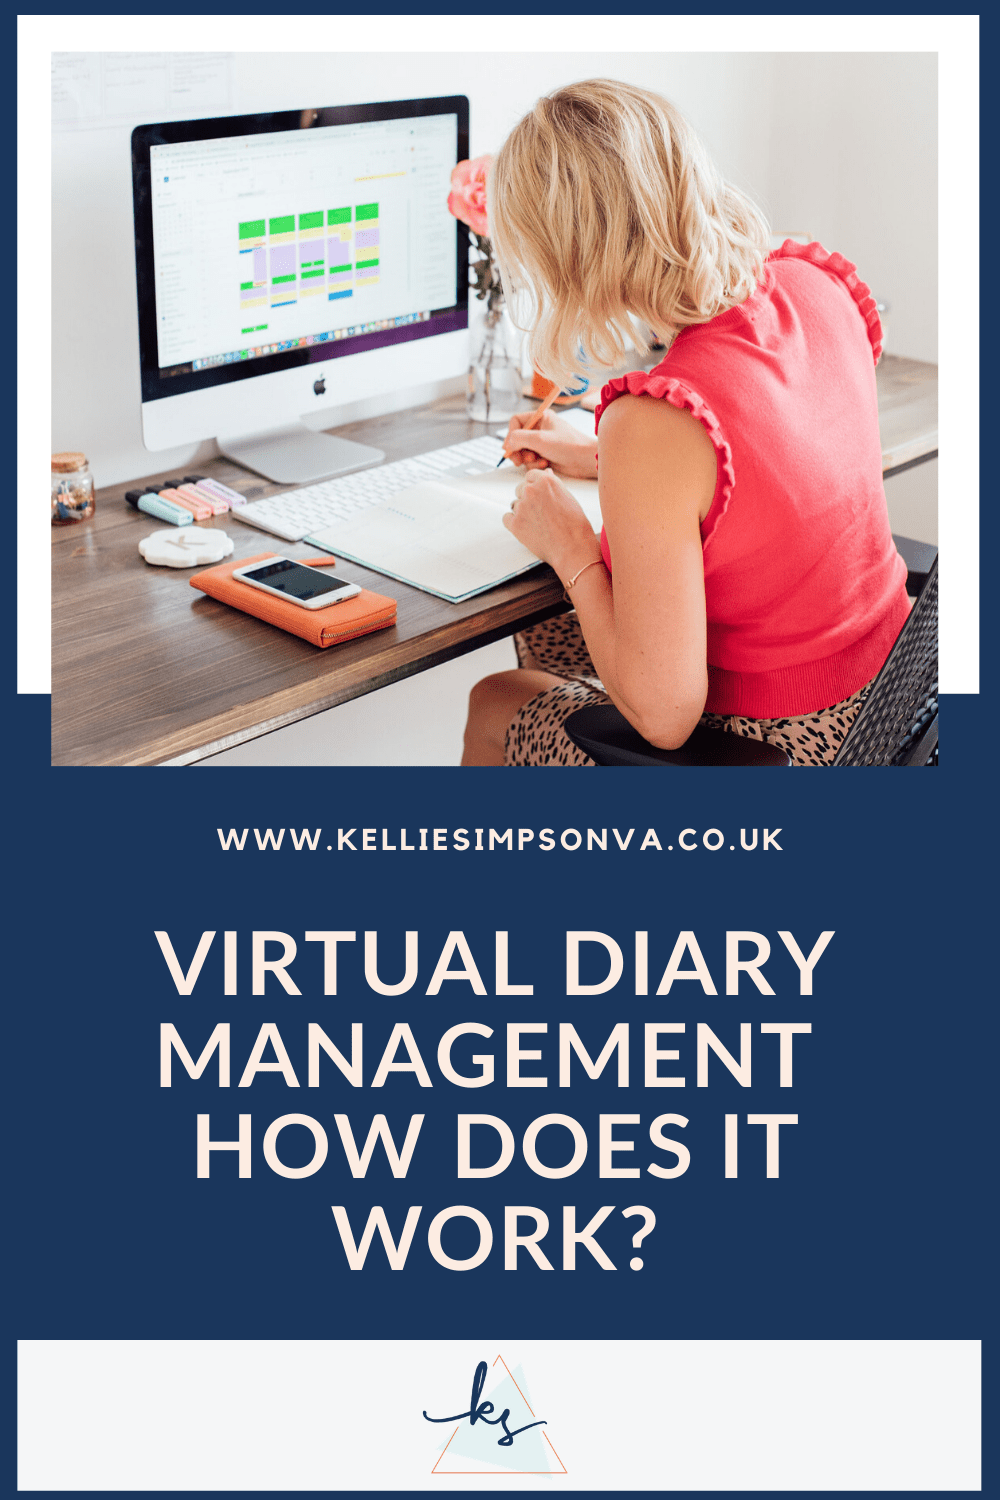 Diary management - how does it work?